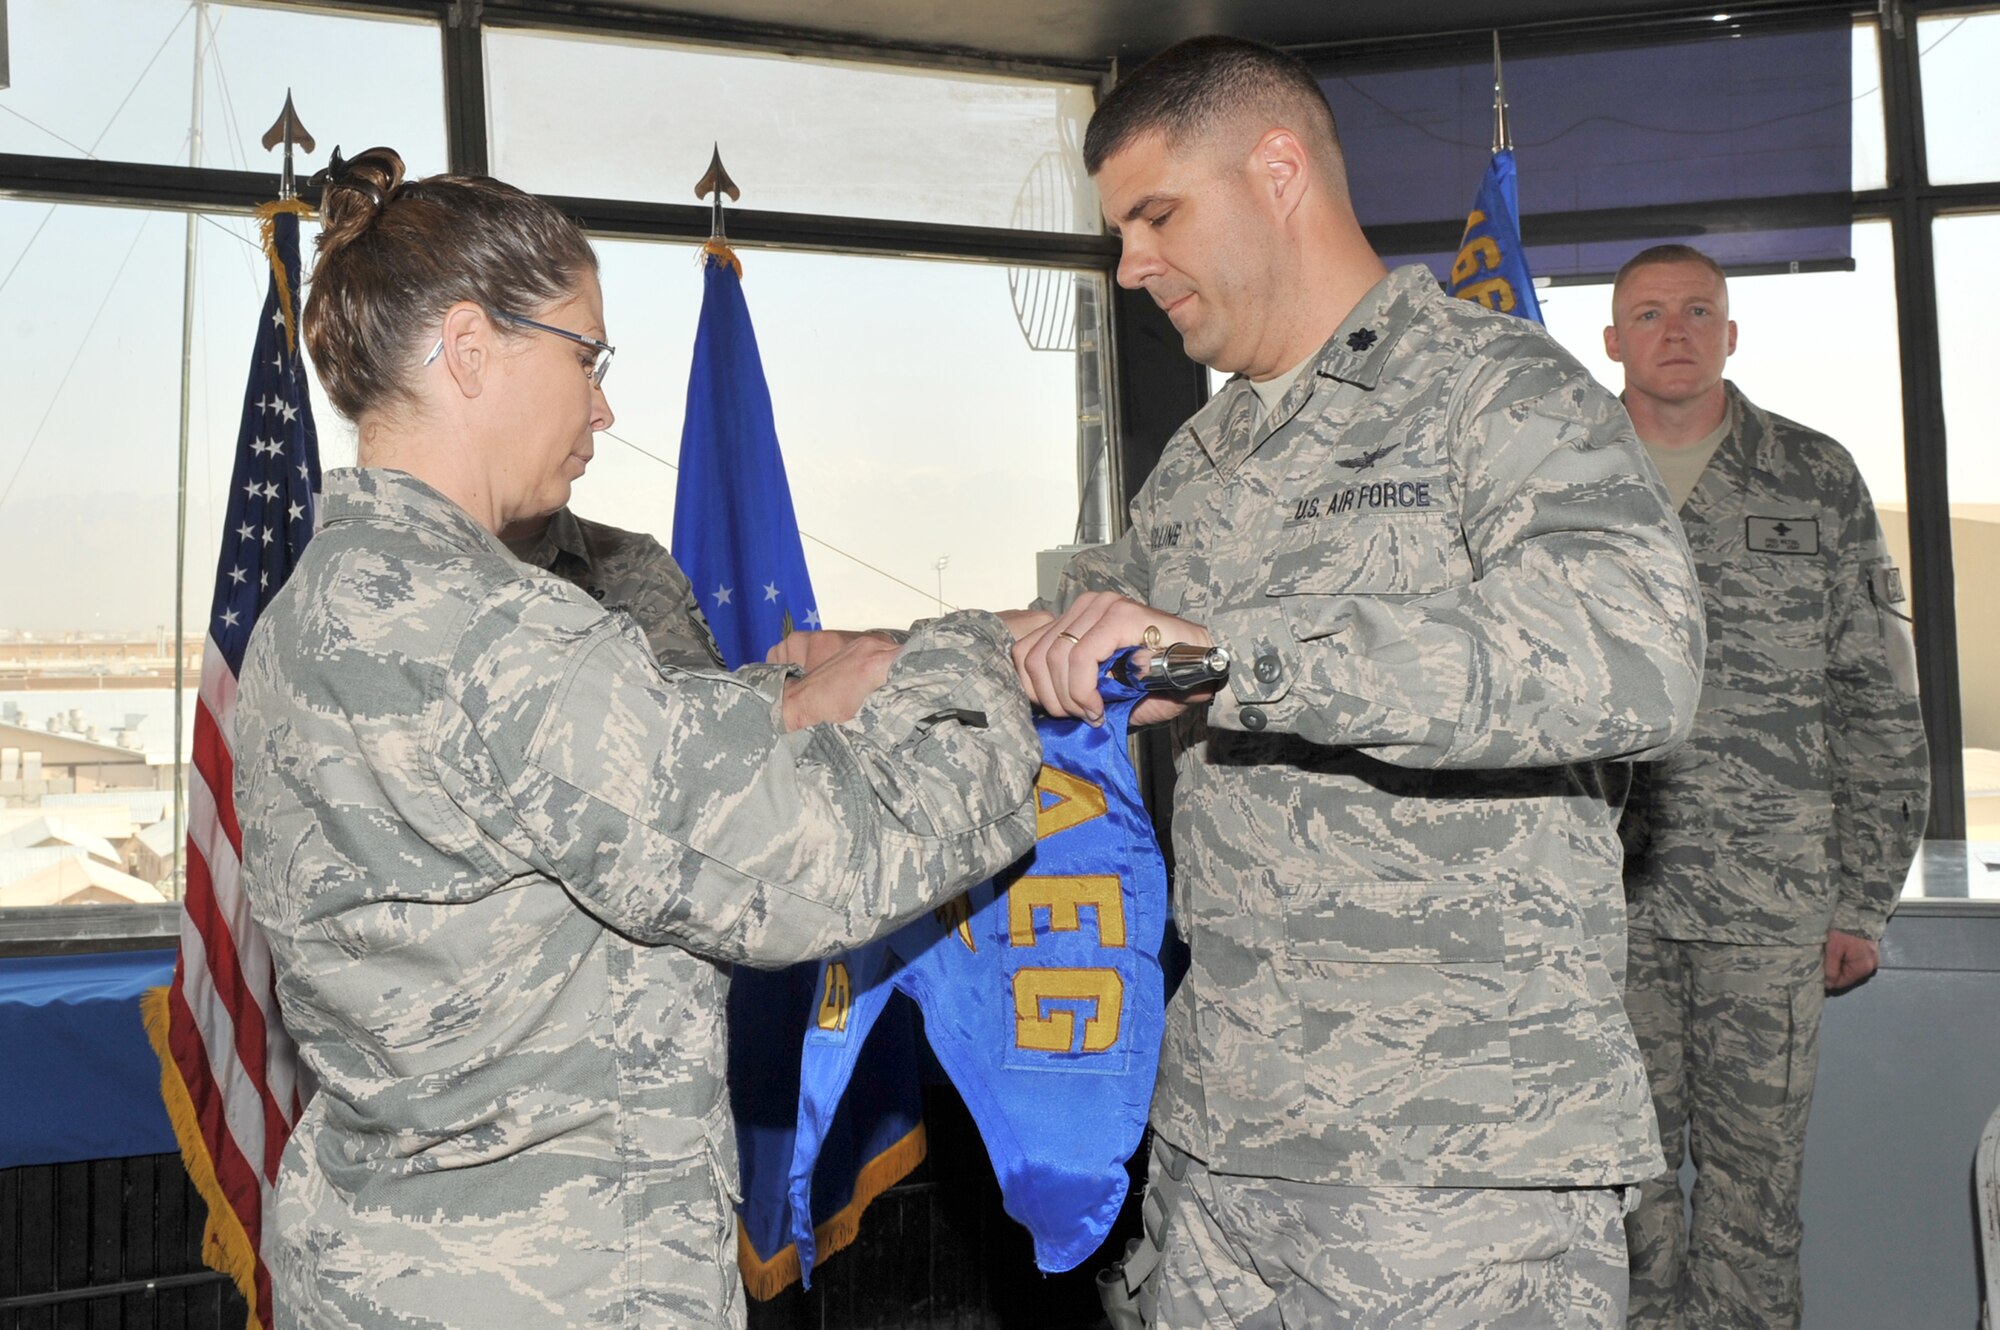 Col. Lesa Toler, 466th Air Expeditionary Group commander, and Lt. Col. Jeffrey Collins, 766th  Air Expeditionary Squadron commander, rolls the guidon as Lt. Col. Collins relinquishes command during the 766th AES inactivation ceremony at Bagram Airfield, Afghanistan, March 23, 2011. Colonel Collins will assume command of the 966th Air Expeditionary Squadron. (U.S. Air Force photo by Senior Airman Sheila deVera)